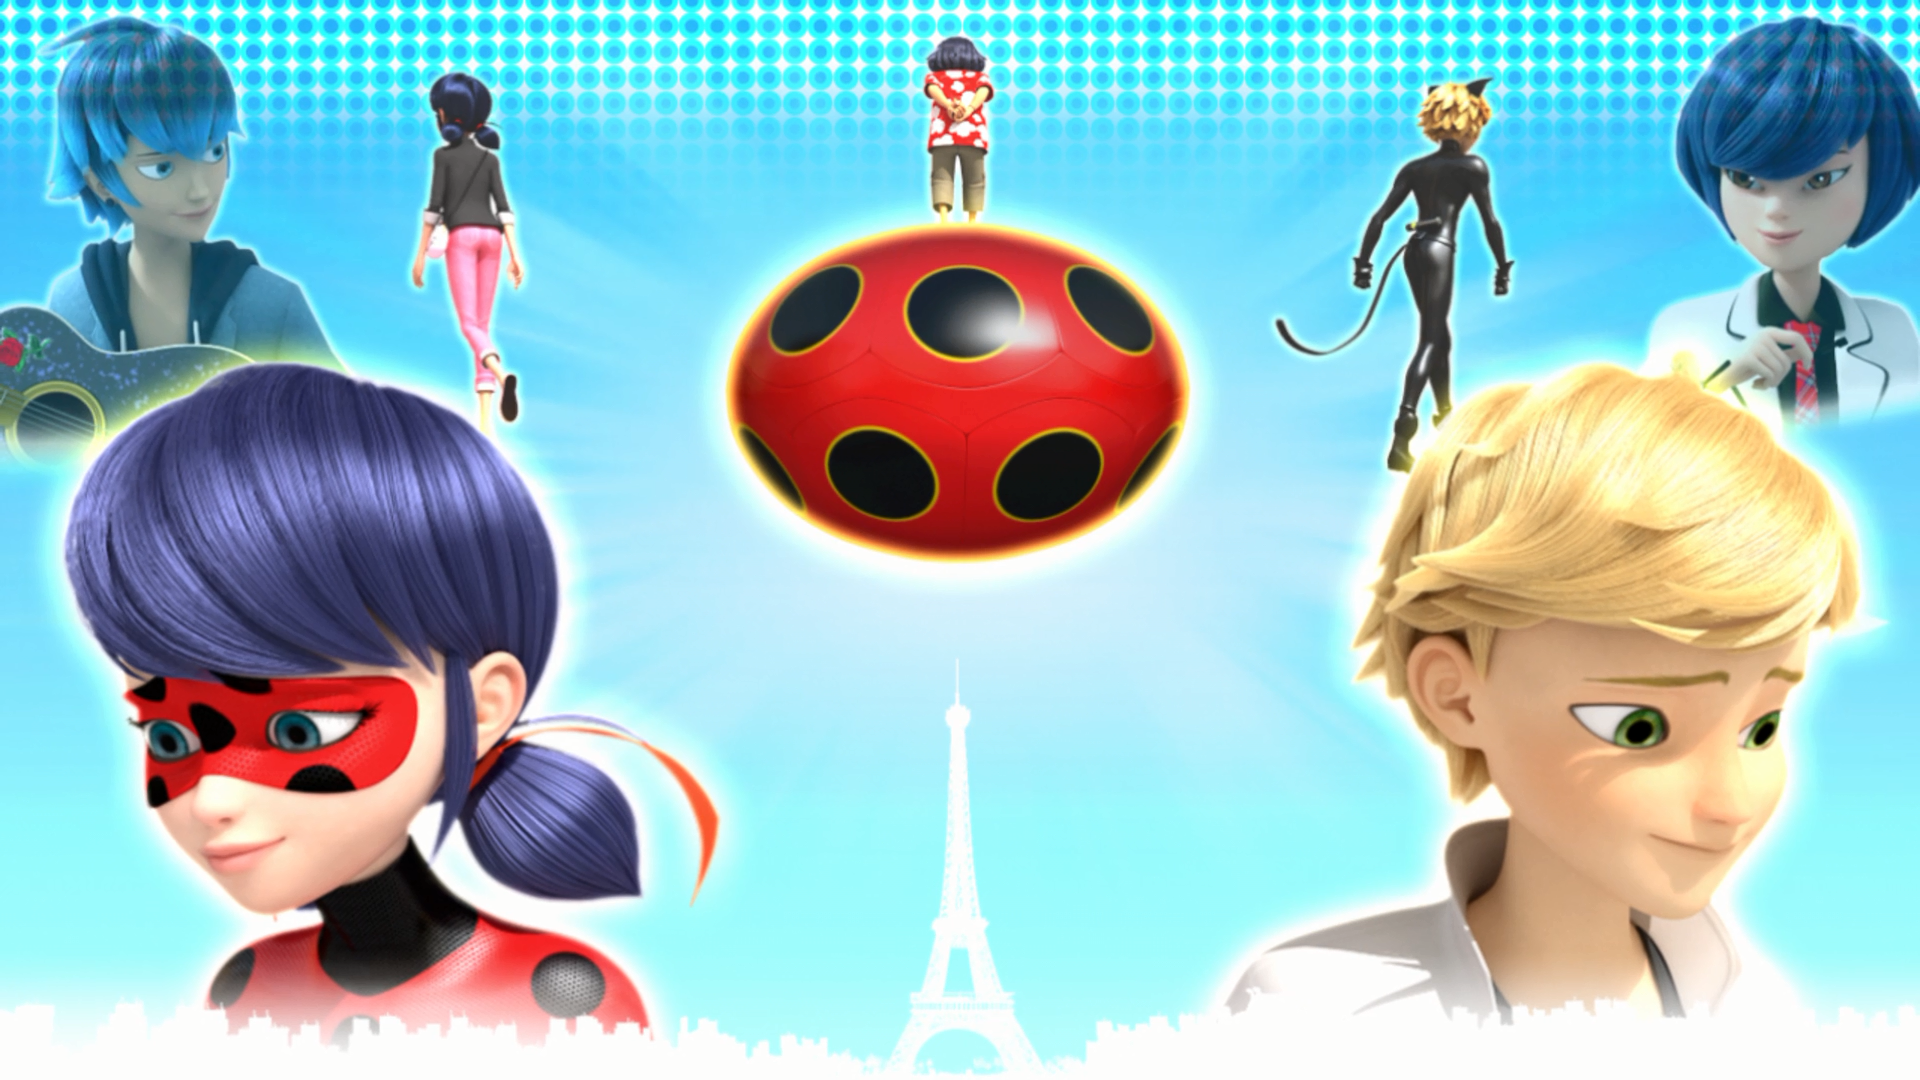 All Chinese miraculous holders (except Queen Bee) in 2023  Miraculous  ladybug anime, Miraculous ladybug comic, Miraculous ladybug fanfiction